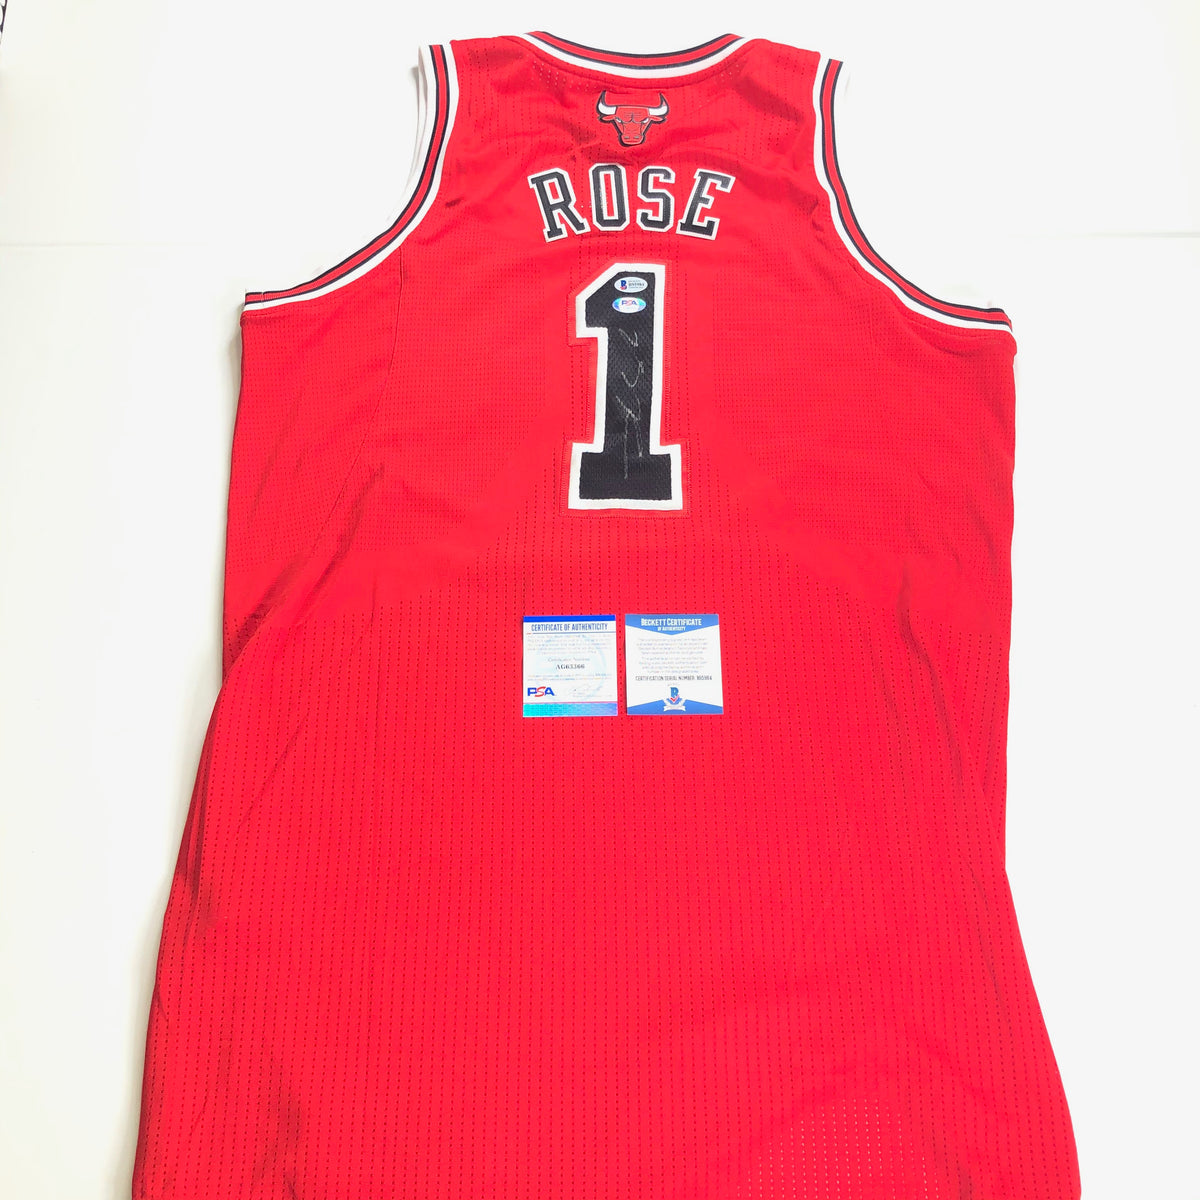 Derrick Rose Signed Jersey And 2012-2013 Team Signed Ball For Sale! for  Sale in Ind Head Park, IL - OfferUp